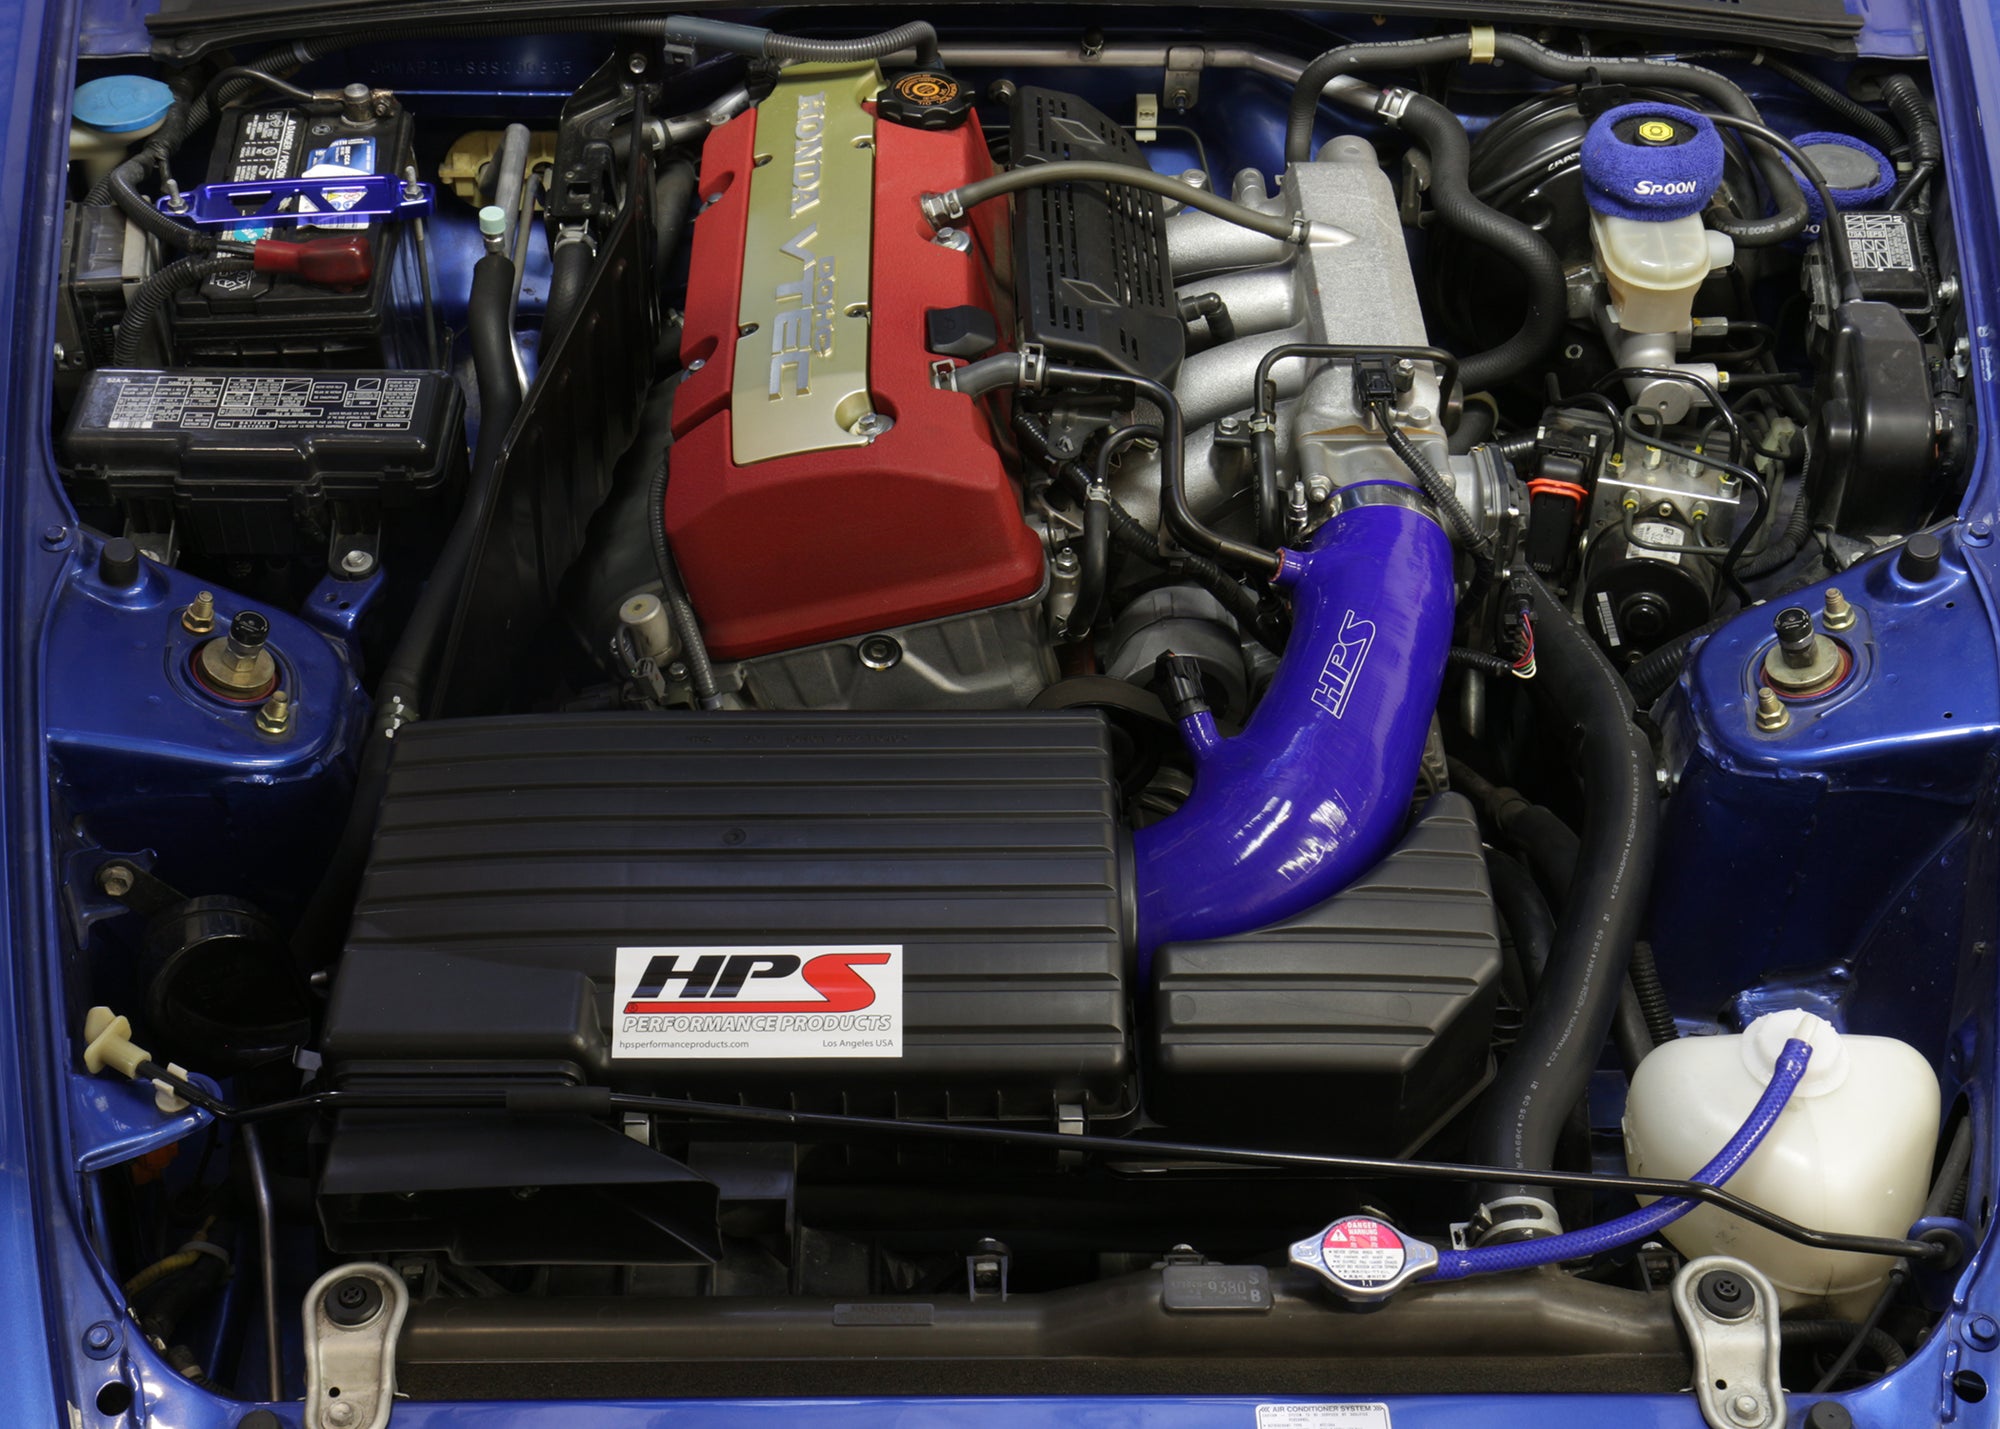 HPS Silicone Air Intake Kit Post MAF Hose Installed 2006-2009 Honda S2000 S2K AP2 2.2L F22 drive-by-wire 57-3004